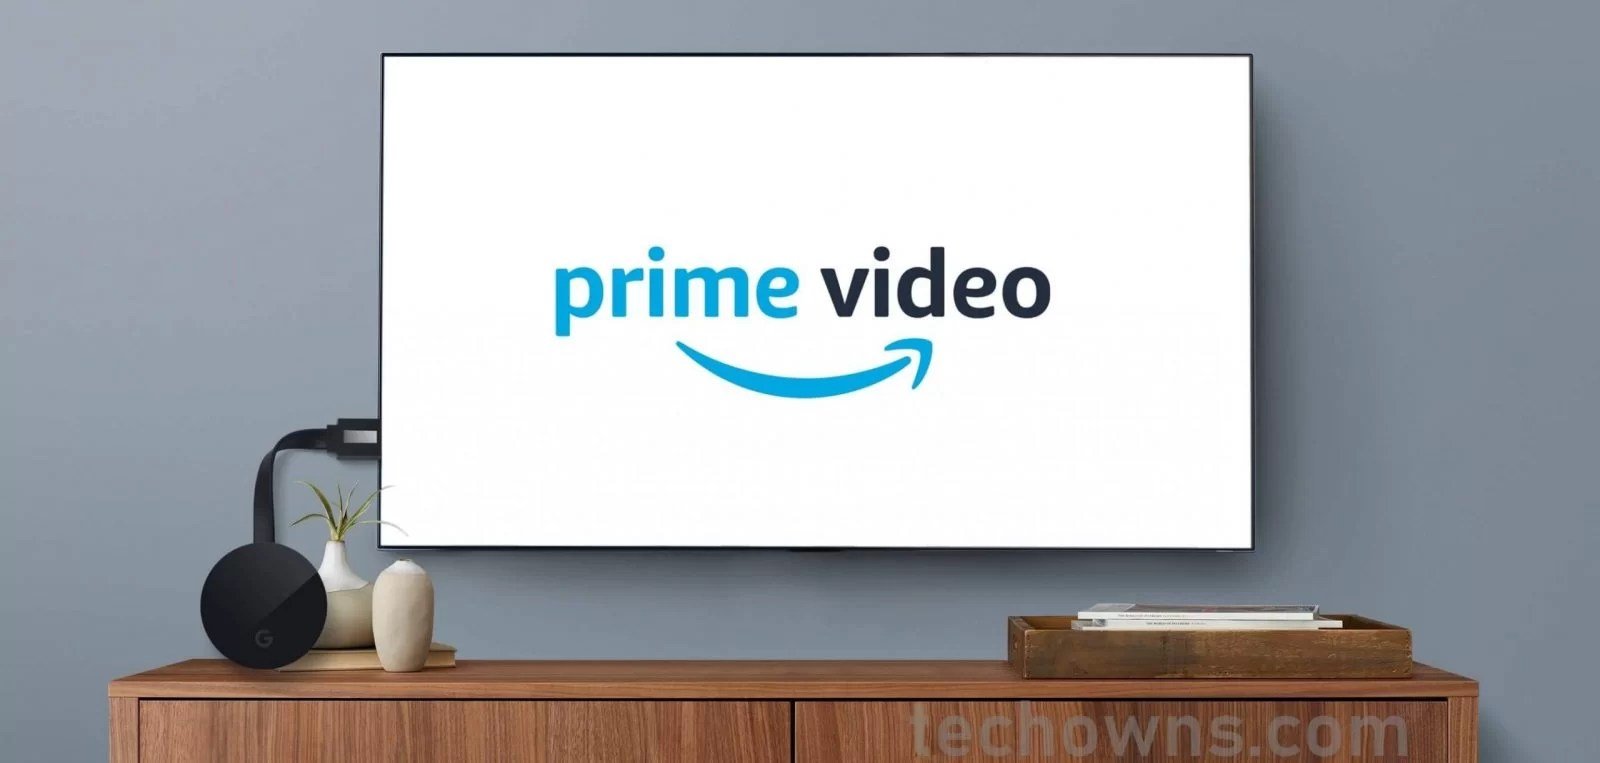 How to Chromecast Amazon Prime Video From a Phone/PC ...